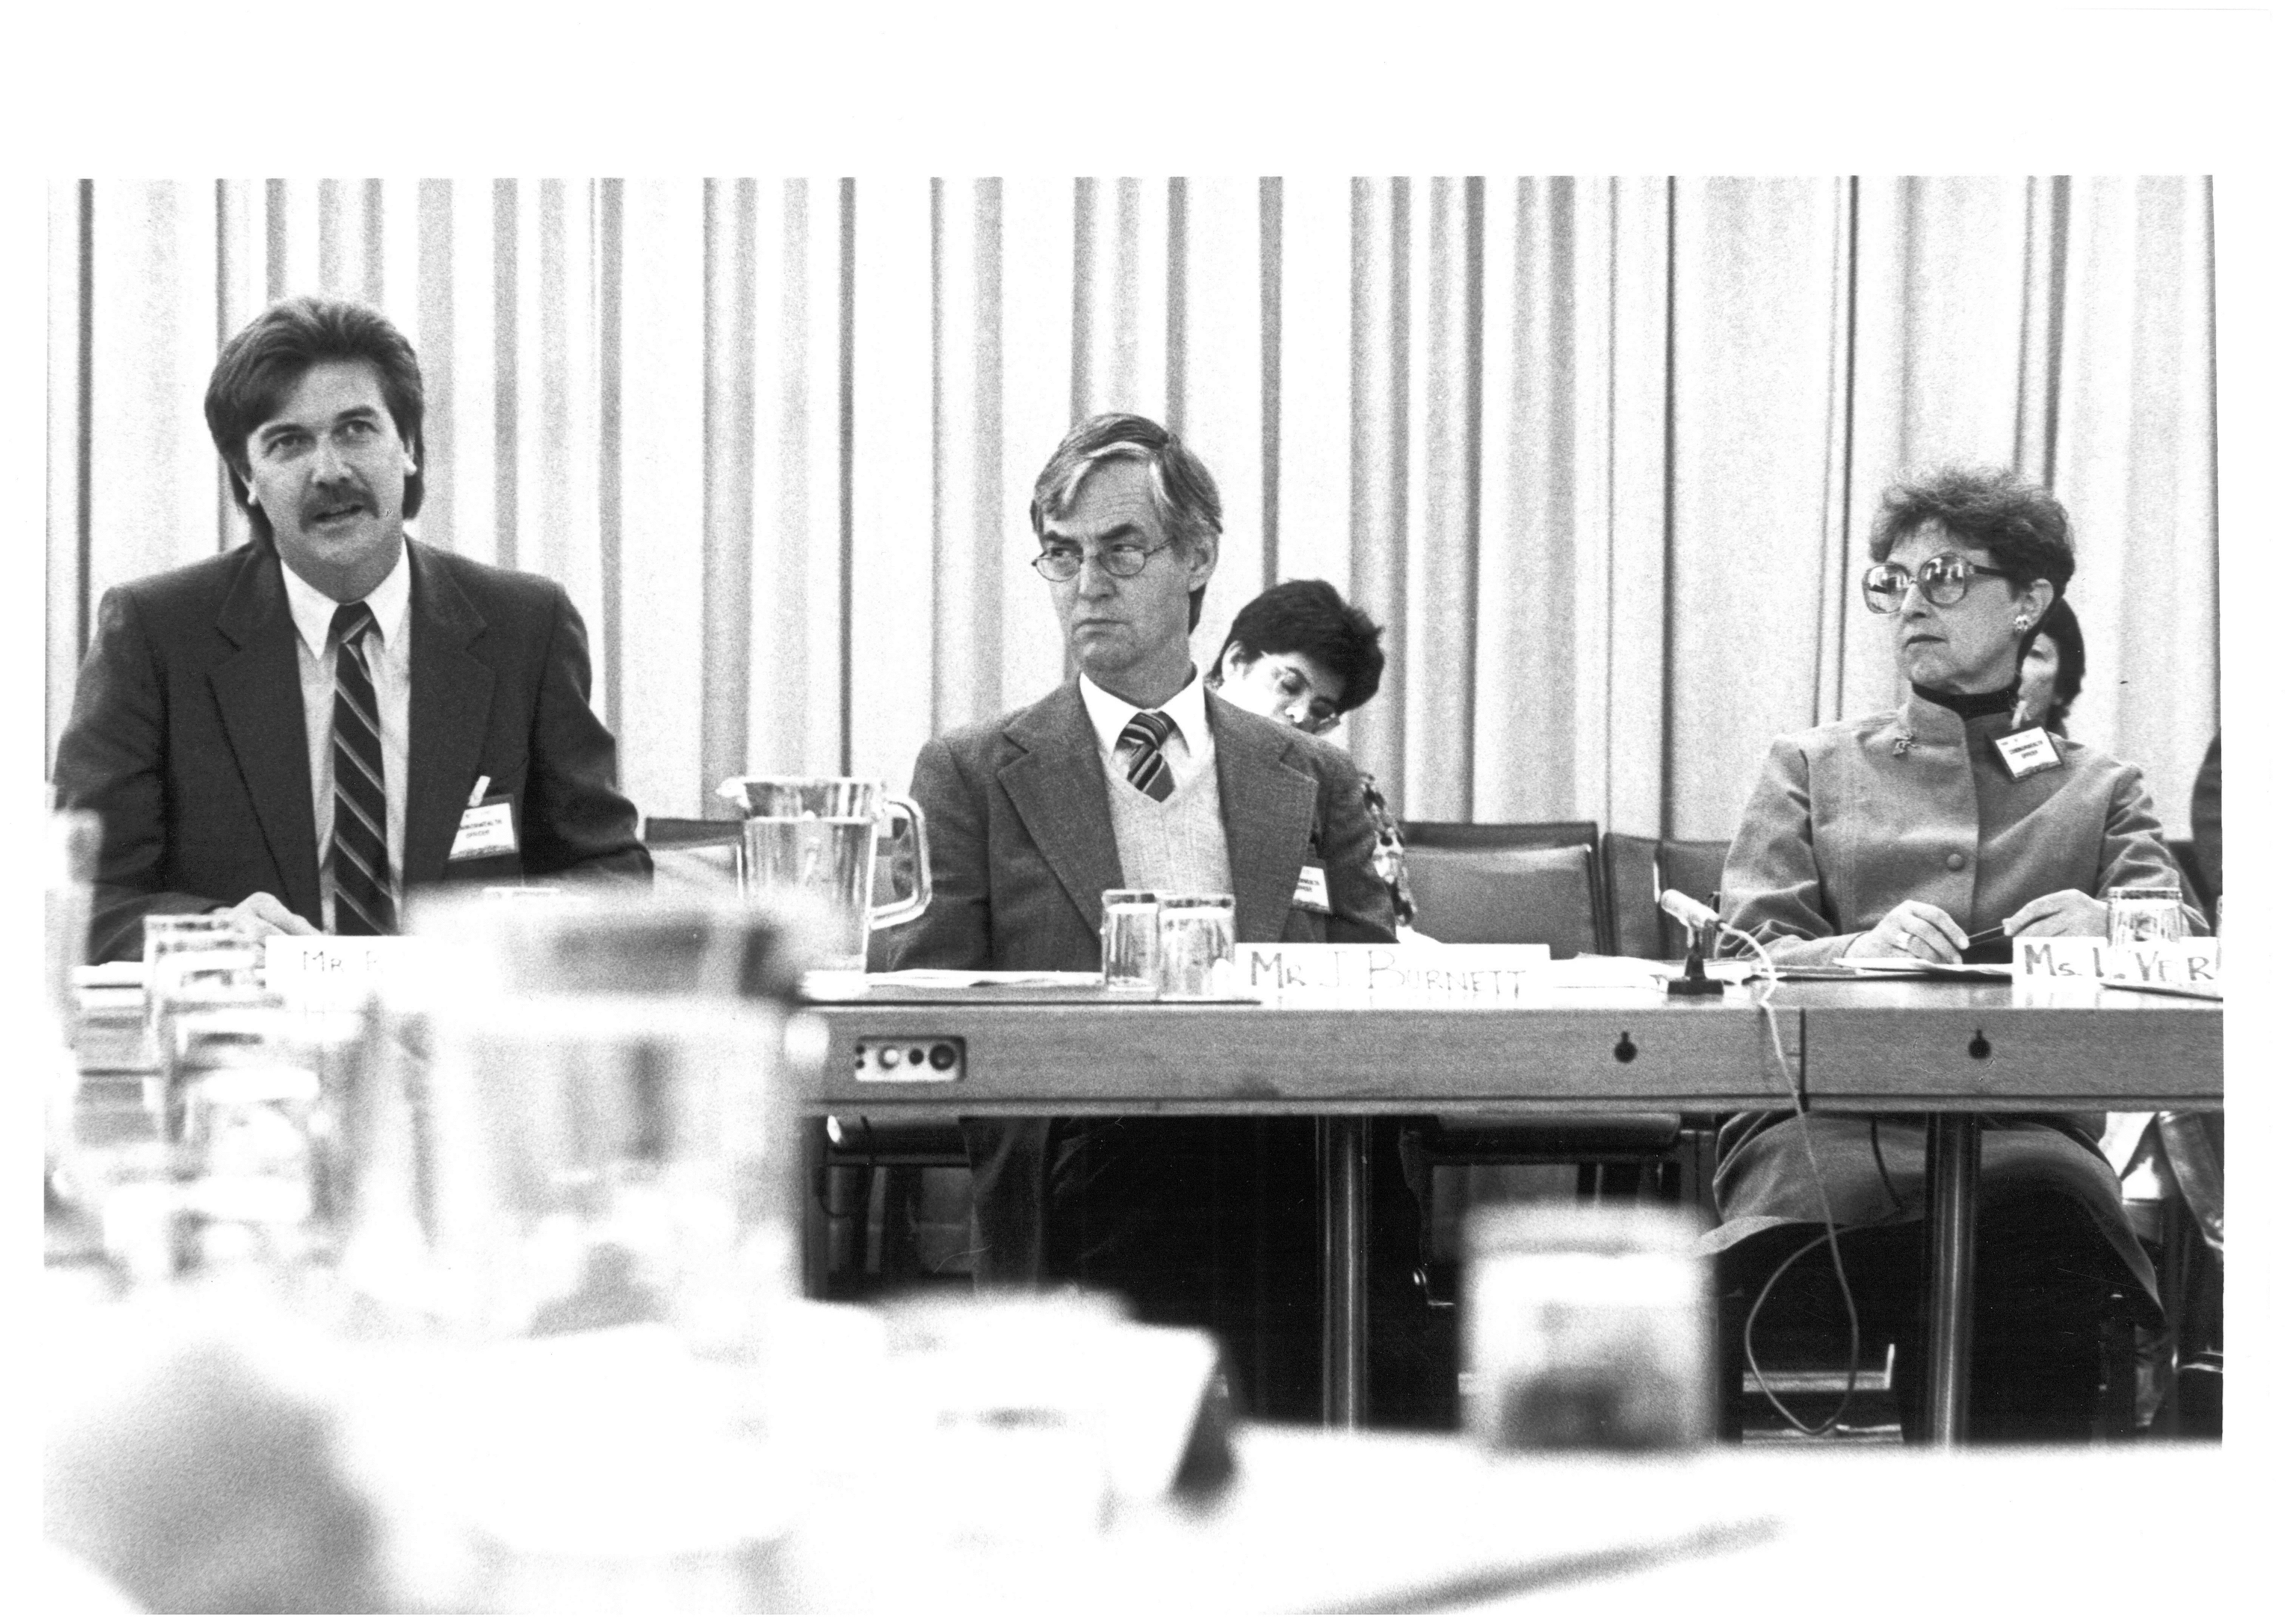 Officers from the Department of Education and Commonwealth Schools Commission appearing before the Standing Committee on Education and the Arts, 14 July 1986. L-R: Witnesses Ross Harris, John Burnett and Lois Verrall.